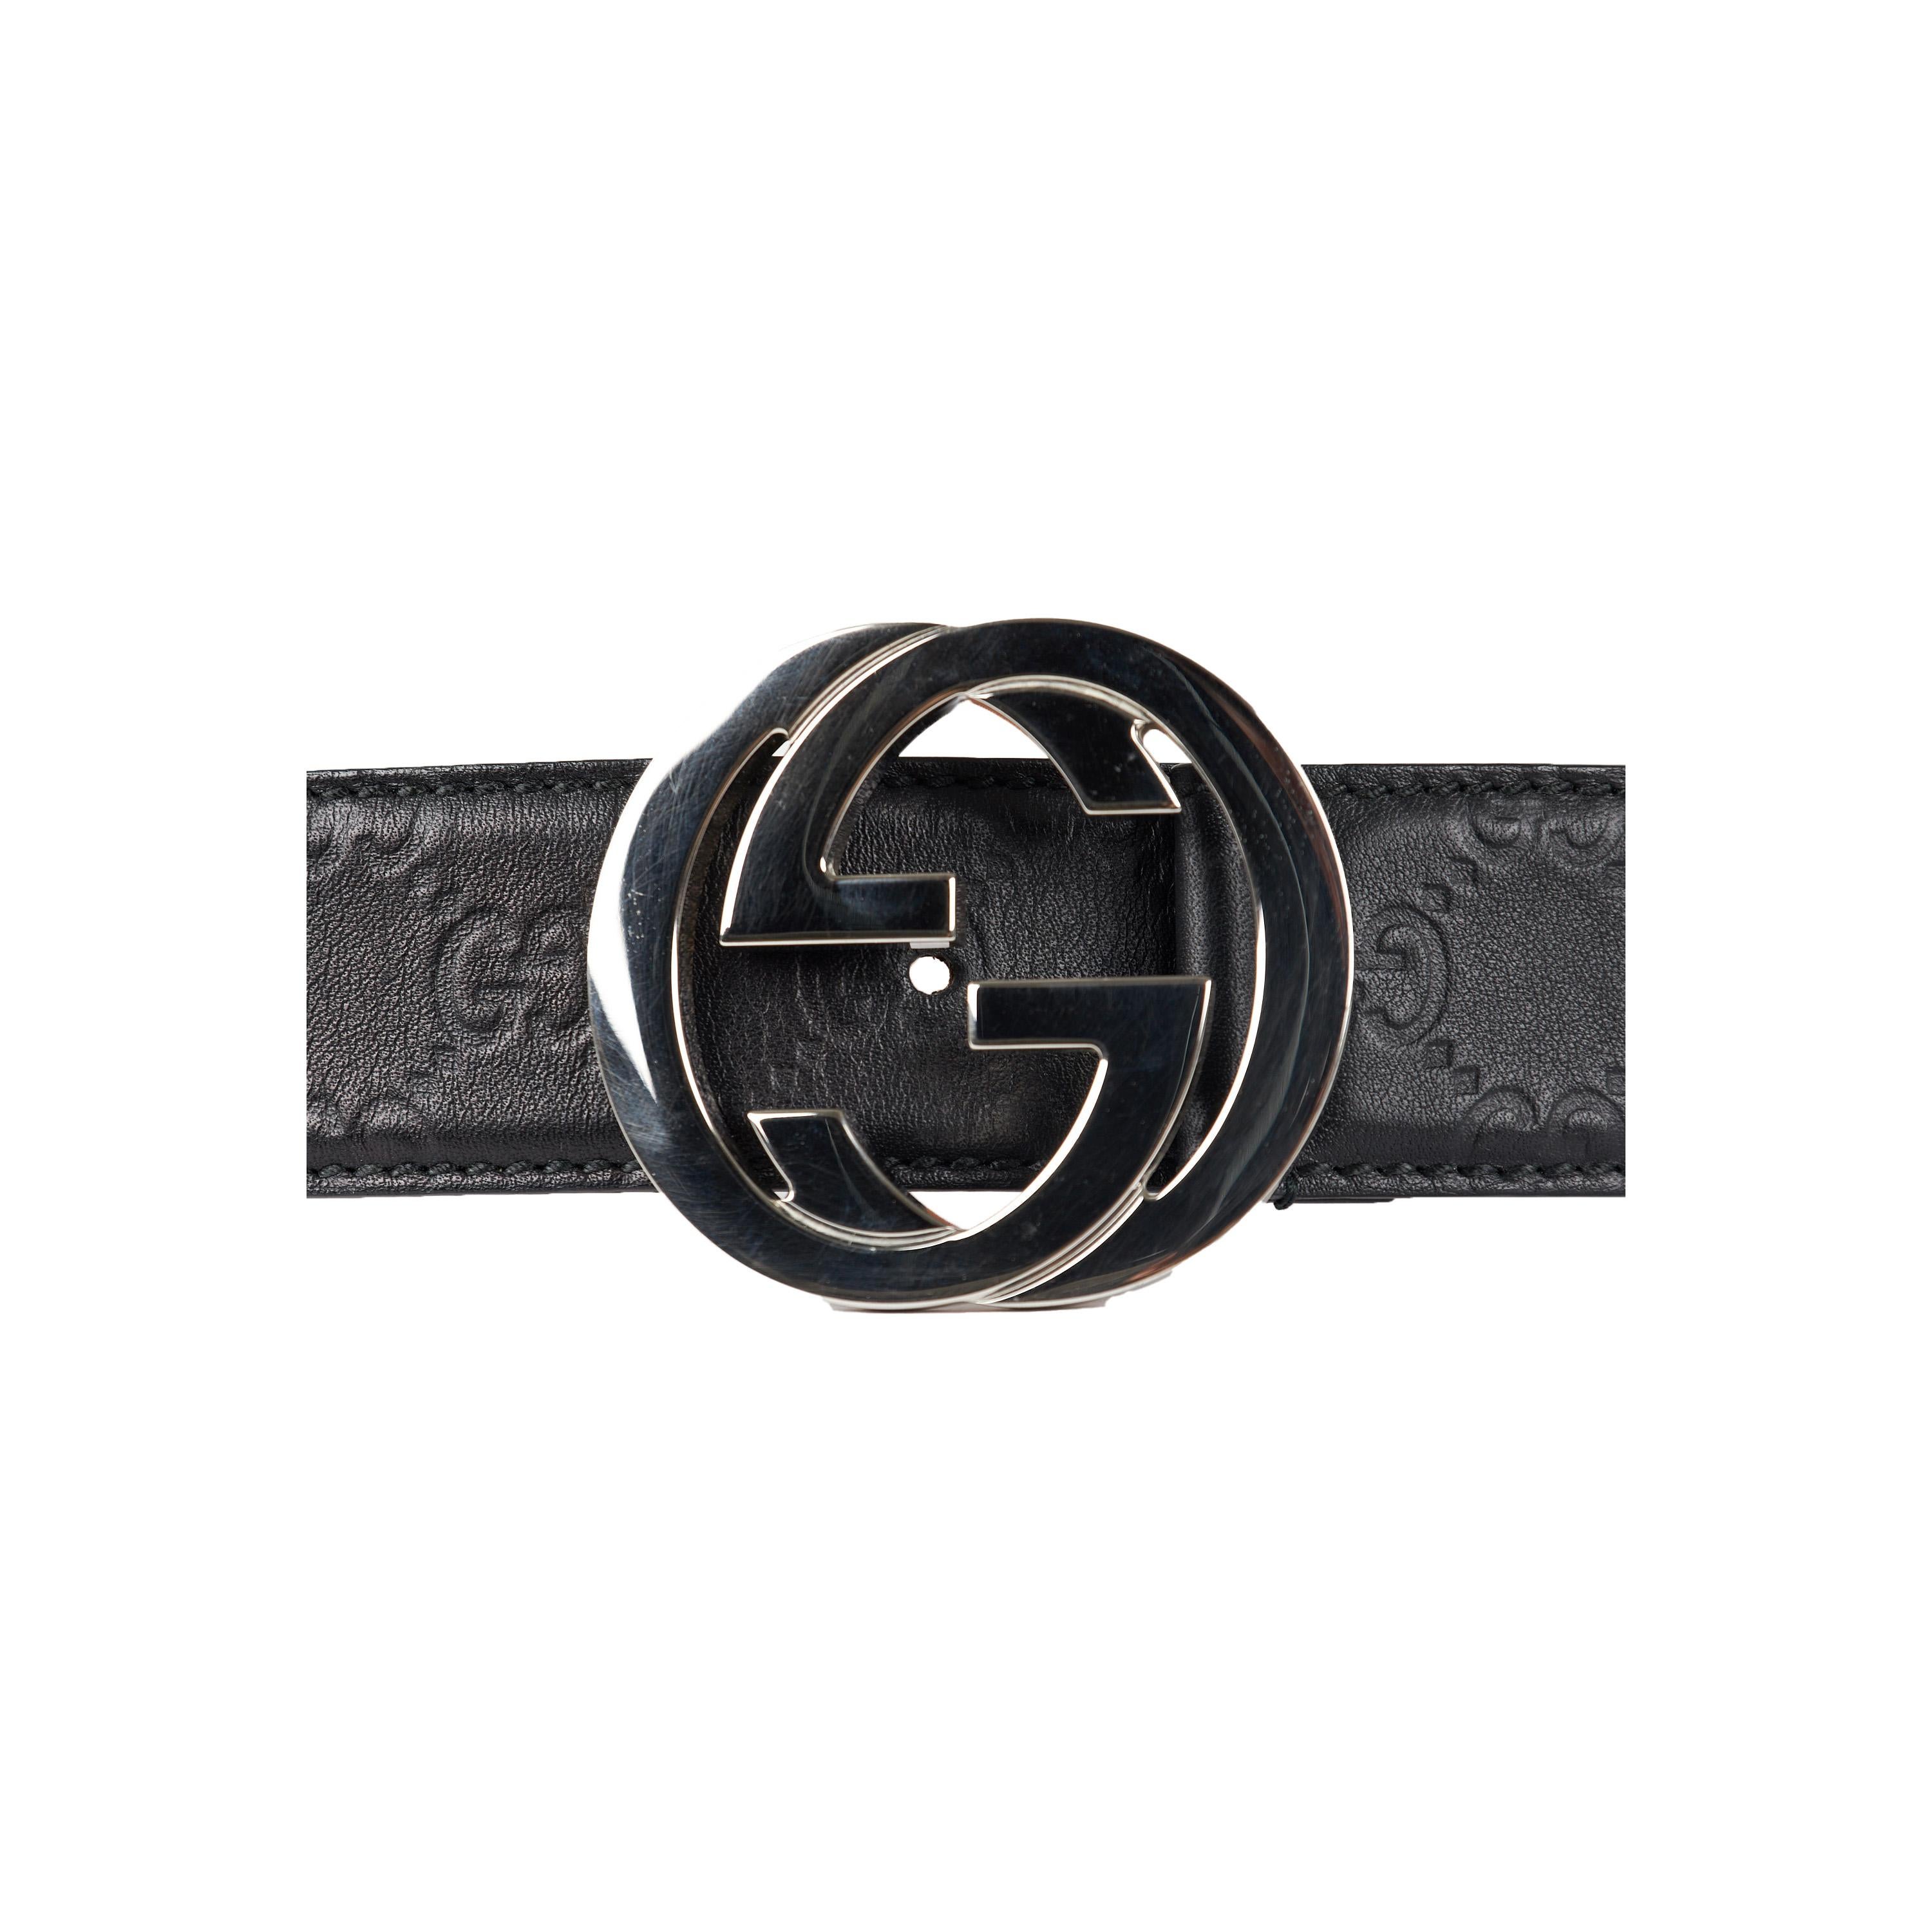 This elegant Gucci Interlocking G belt, crafted from quality black leather, is embossed with the GG Guccissima pattern and finished with a timelessly stylish silver tone Interlocking G buckle. Luxurious yet practical, it is the perfect accessory for